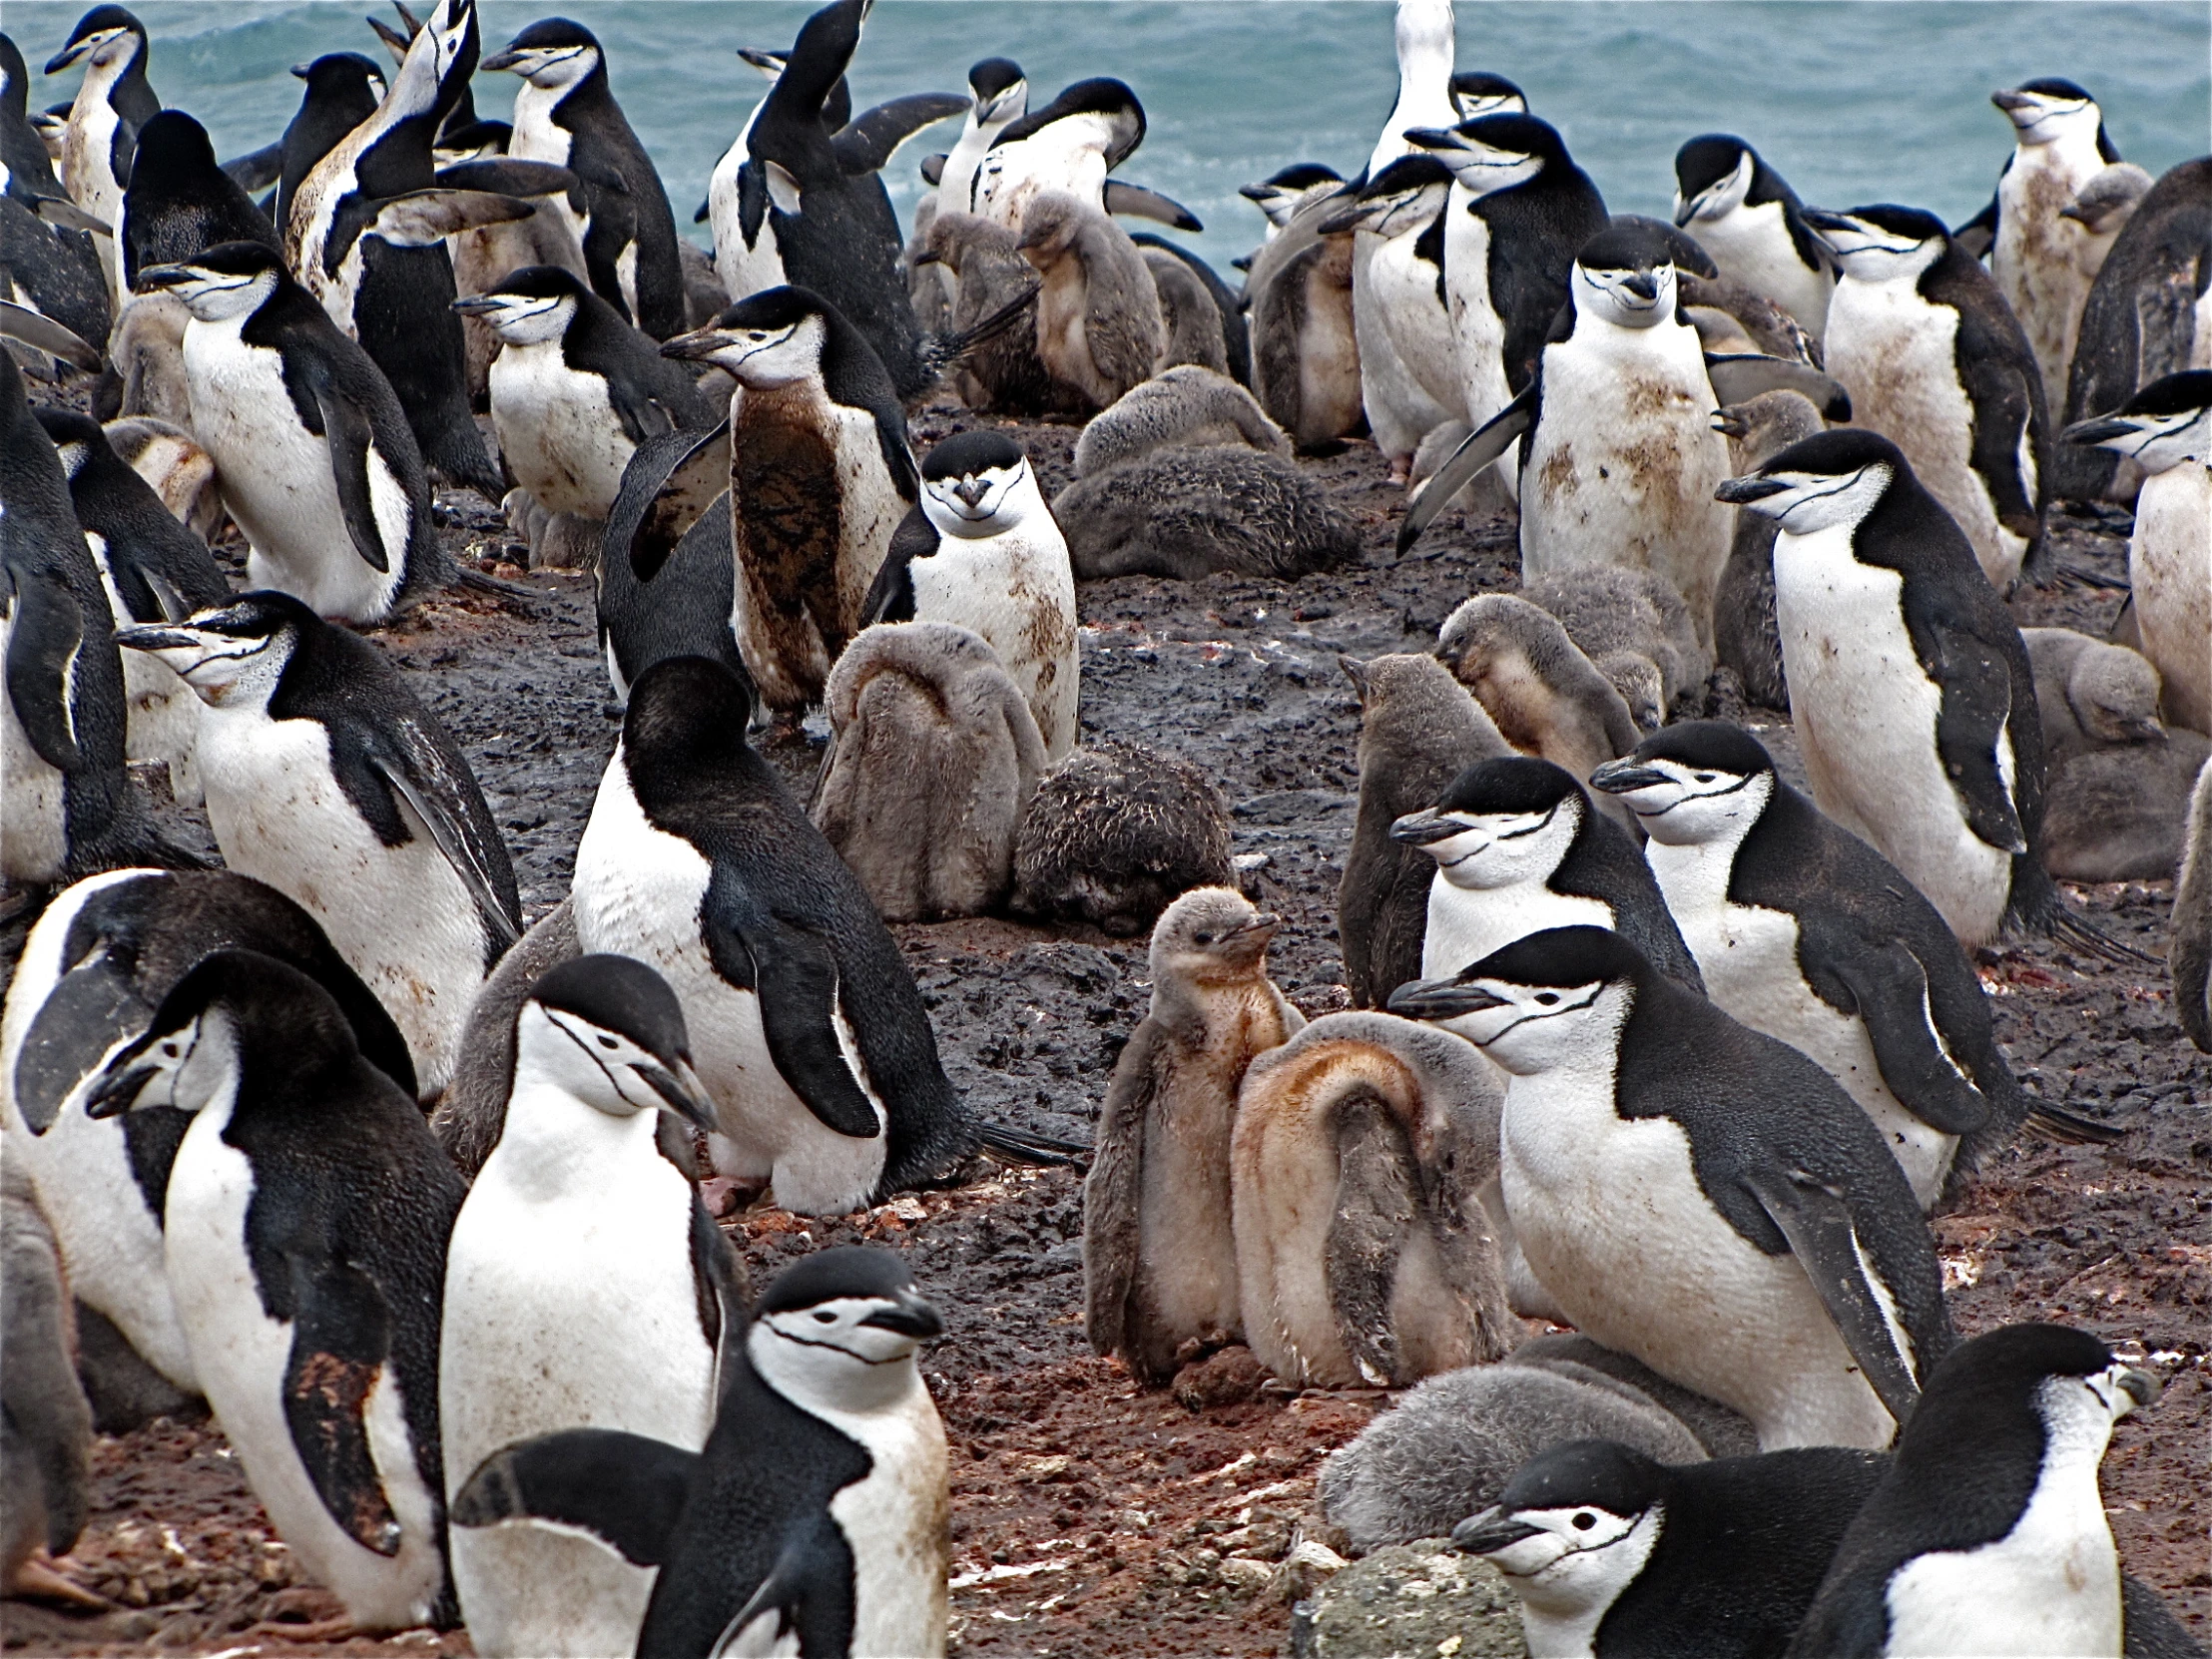 a large number of penguins are in a large group